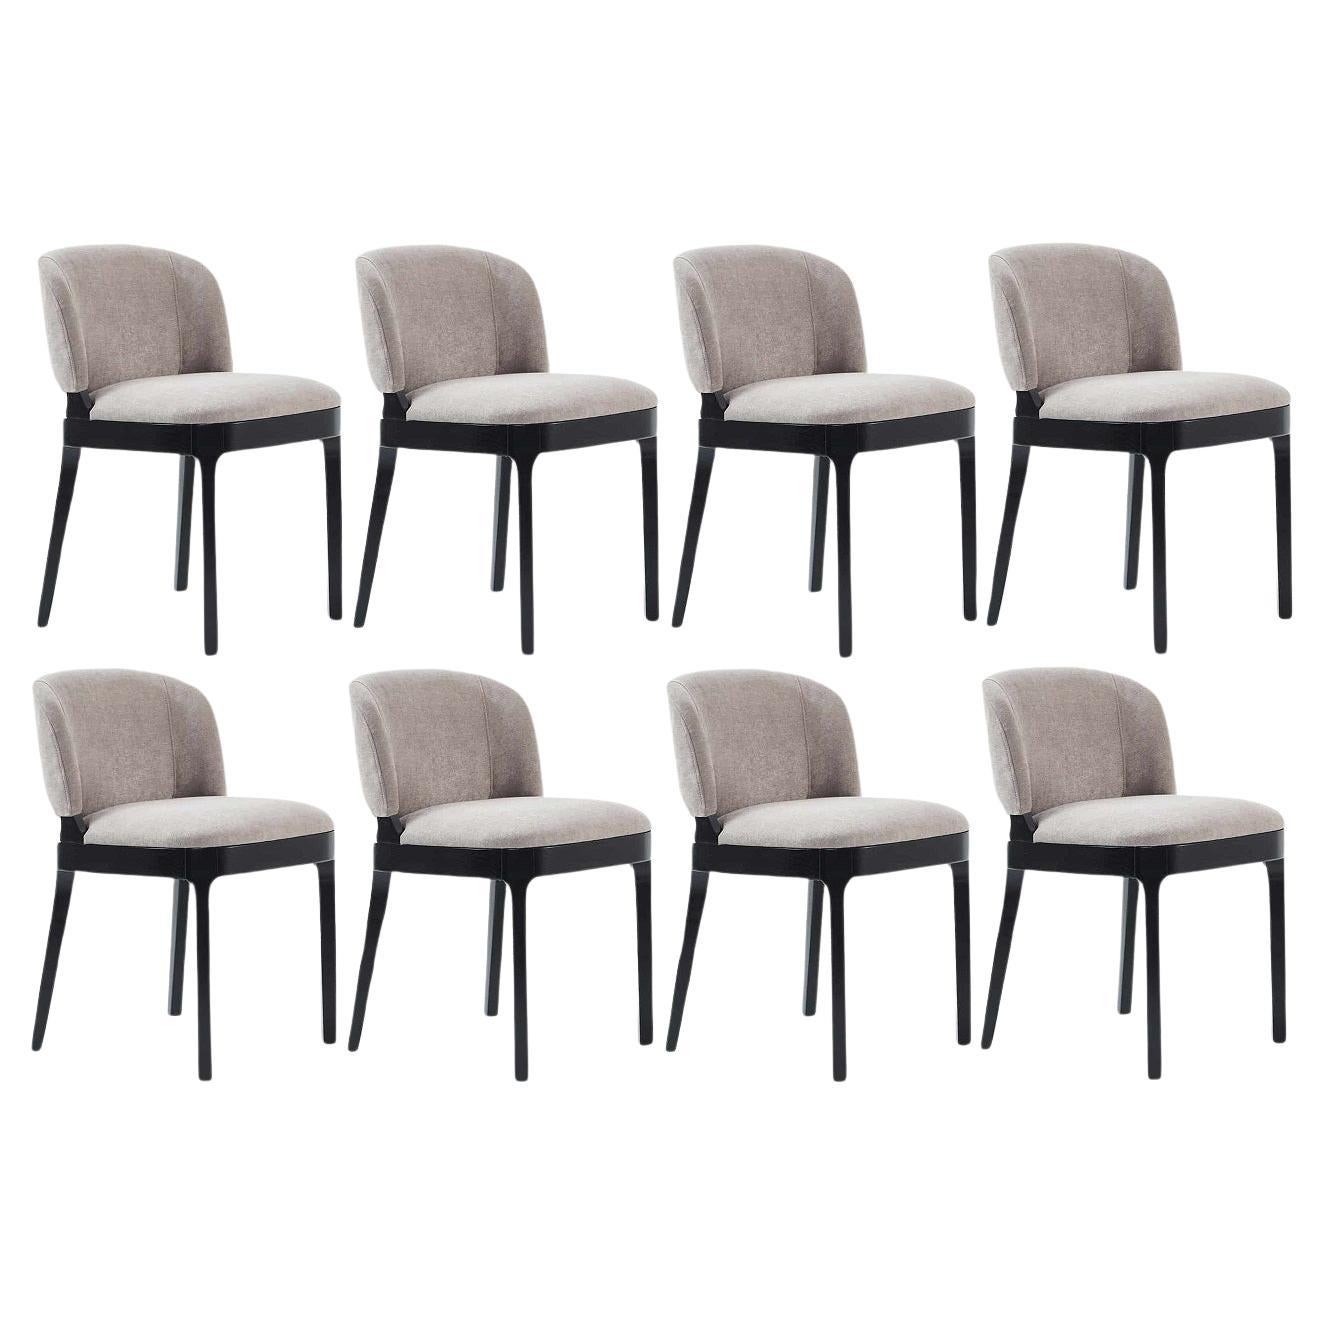 Set of 8 Dining Chairs in Atmosphere Grey Velvet/Natural Oak For Sale